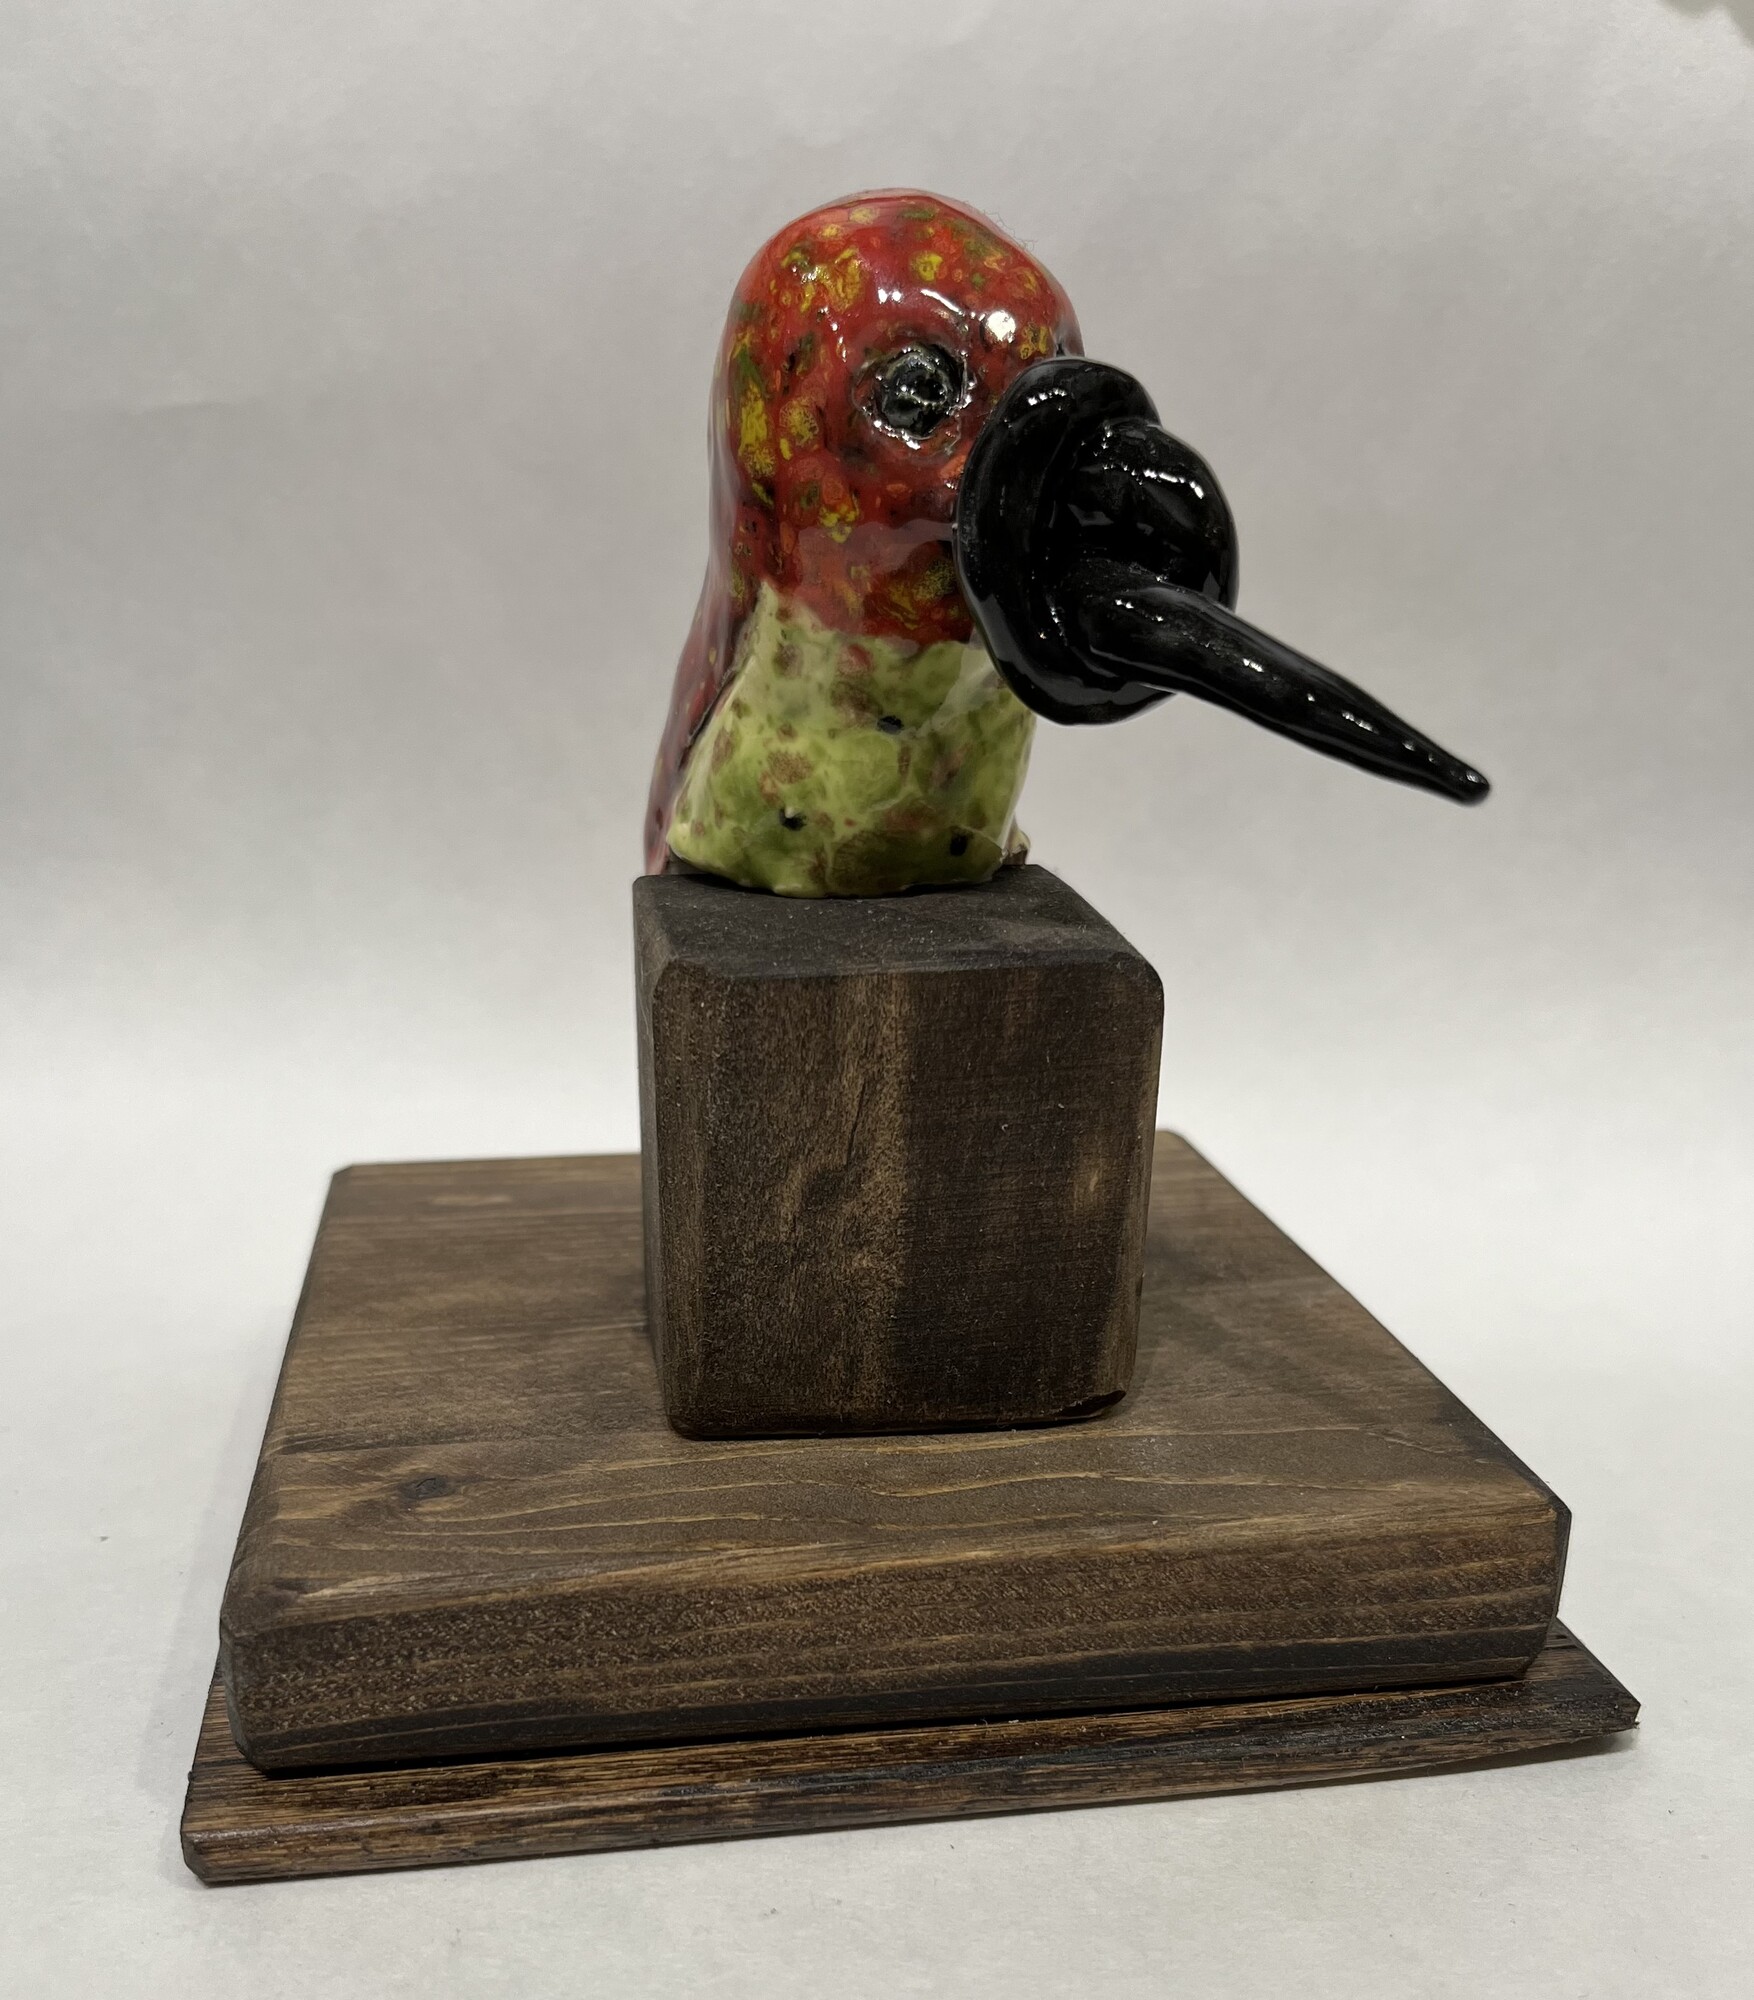 Knot A Hummingbird,
Clay
2in. x 5in. x 4in.
Fred Freeman

This is a hummingbird whose beak is in a knot.